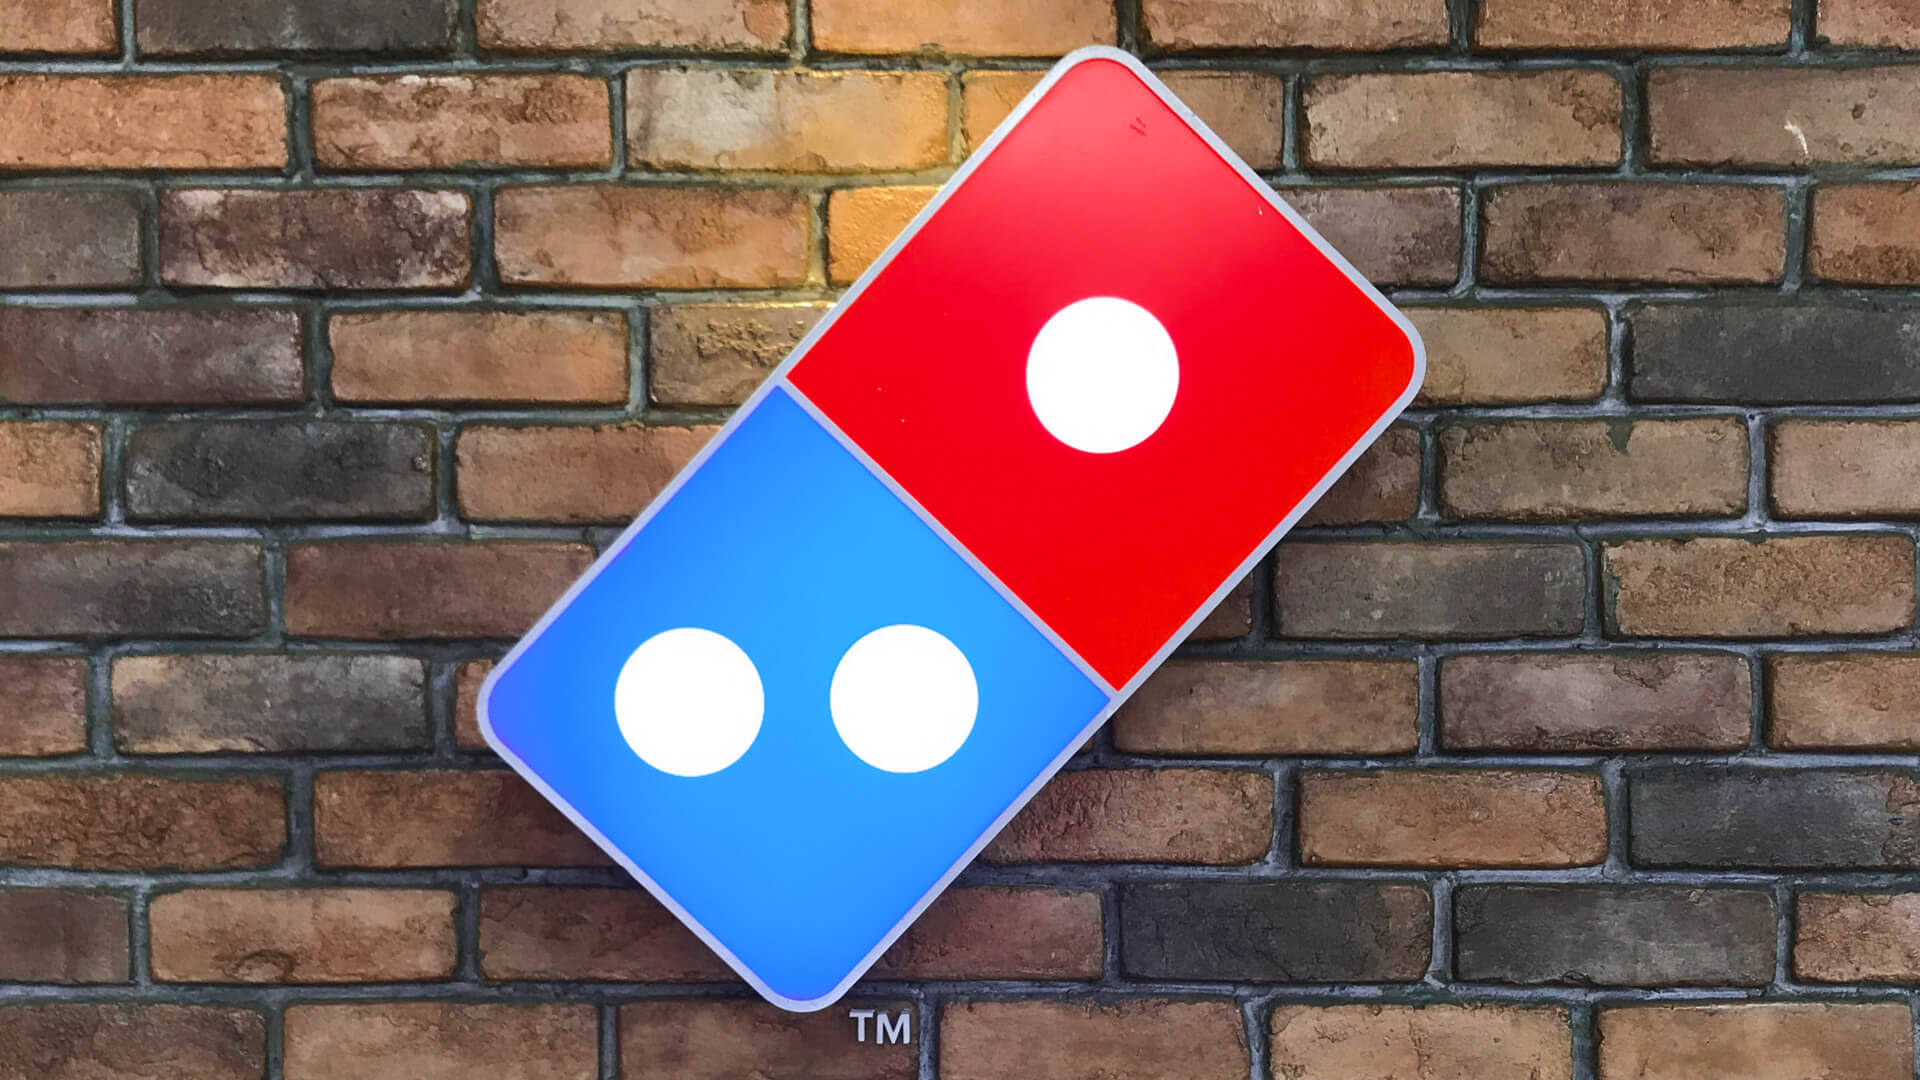 Dominos Pizza Logo On Brick Wall Background